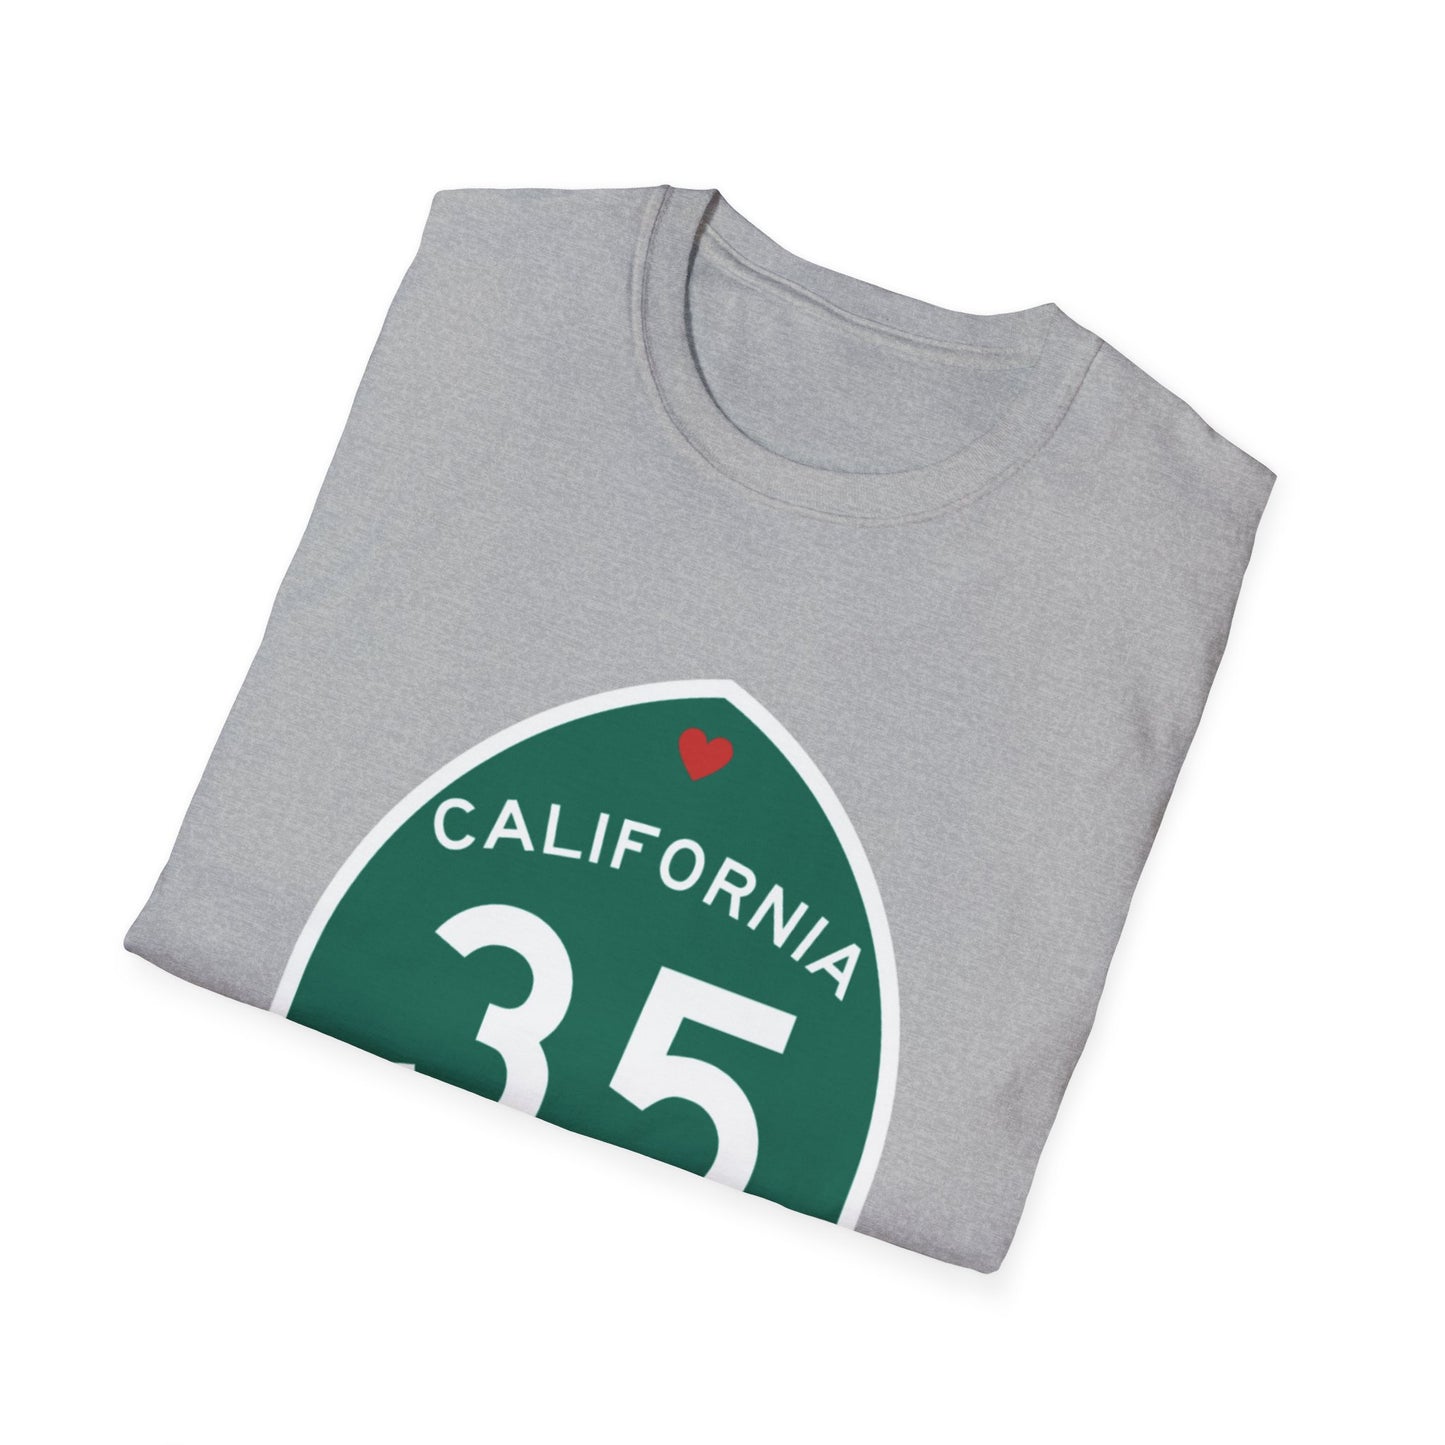 South Skyline Highway 35 Love Unisex Softstyle T-Shirt